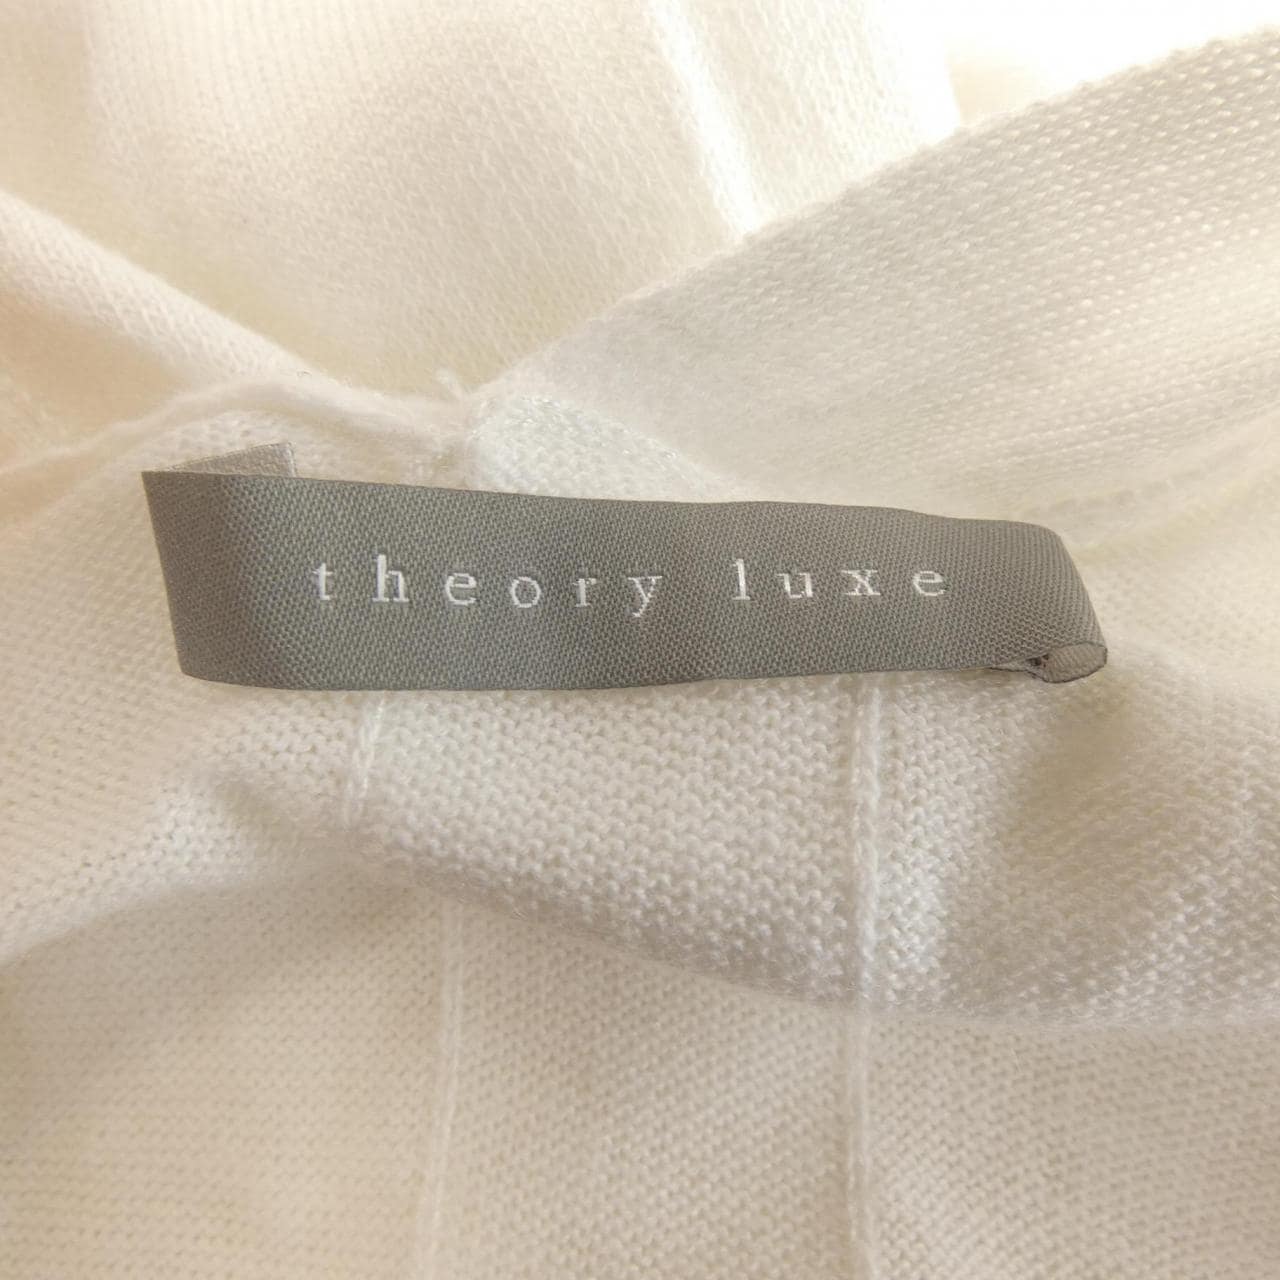 Theory luxe cardigan